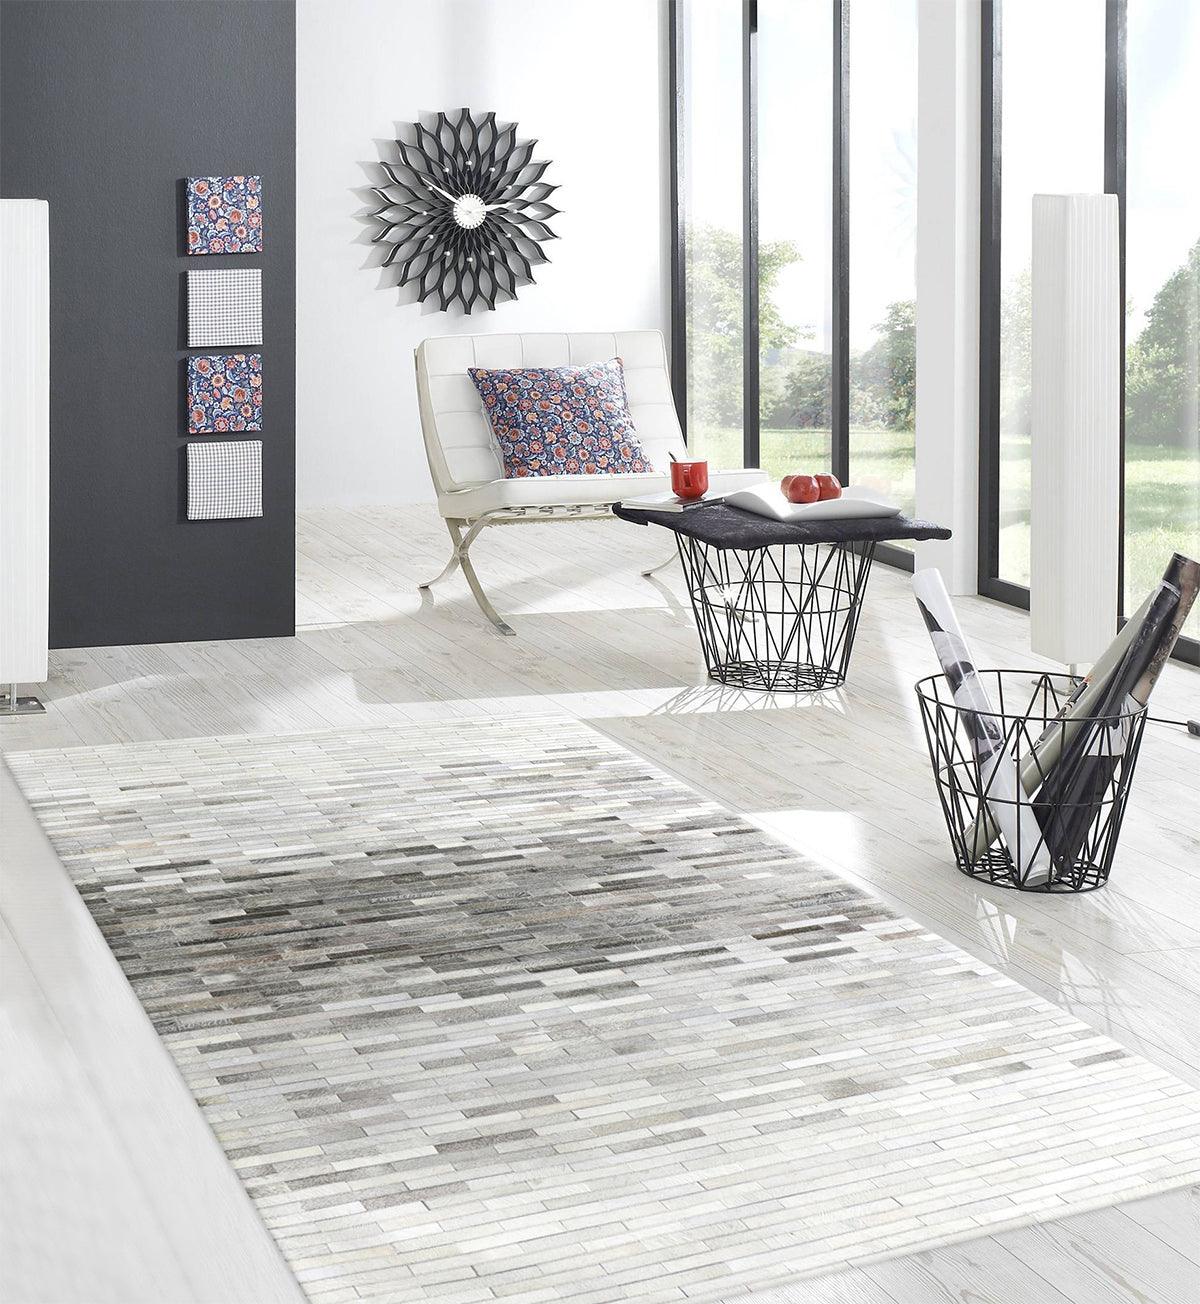 Canvello Modern Galaxy Hand-Loomed Silver Cowhide Area Rug - 2' X 3'